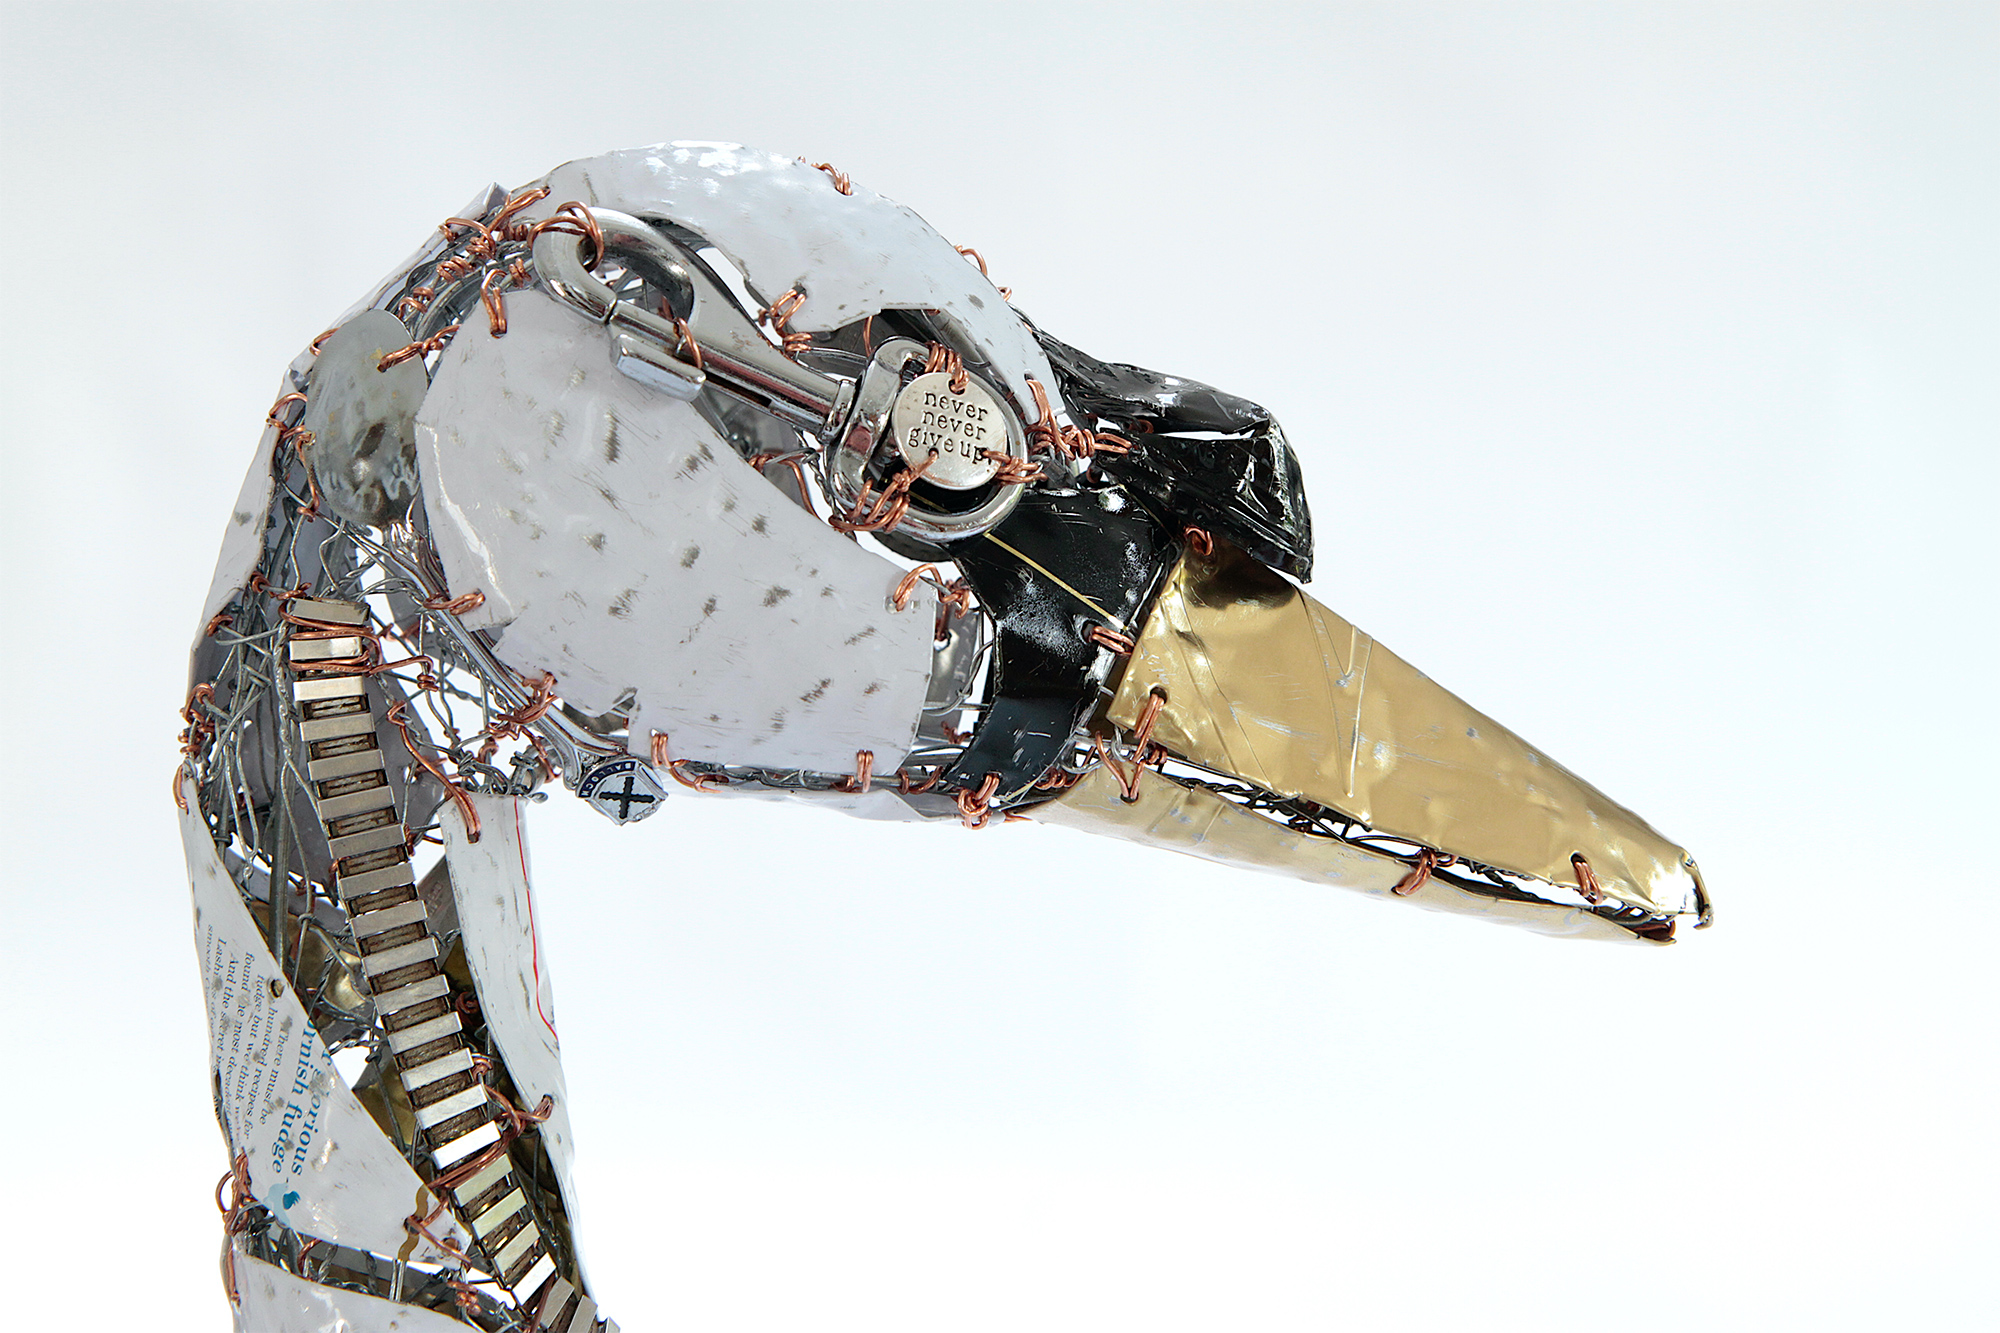 Recycled Scraps and Discarded Objects Are Fashioned Into an Eccentric Menagerie of Metal Animals | 国外美陈 美陈网站 美陈前沿 